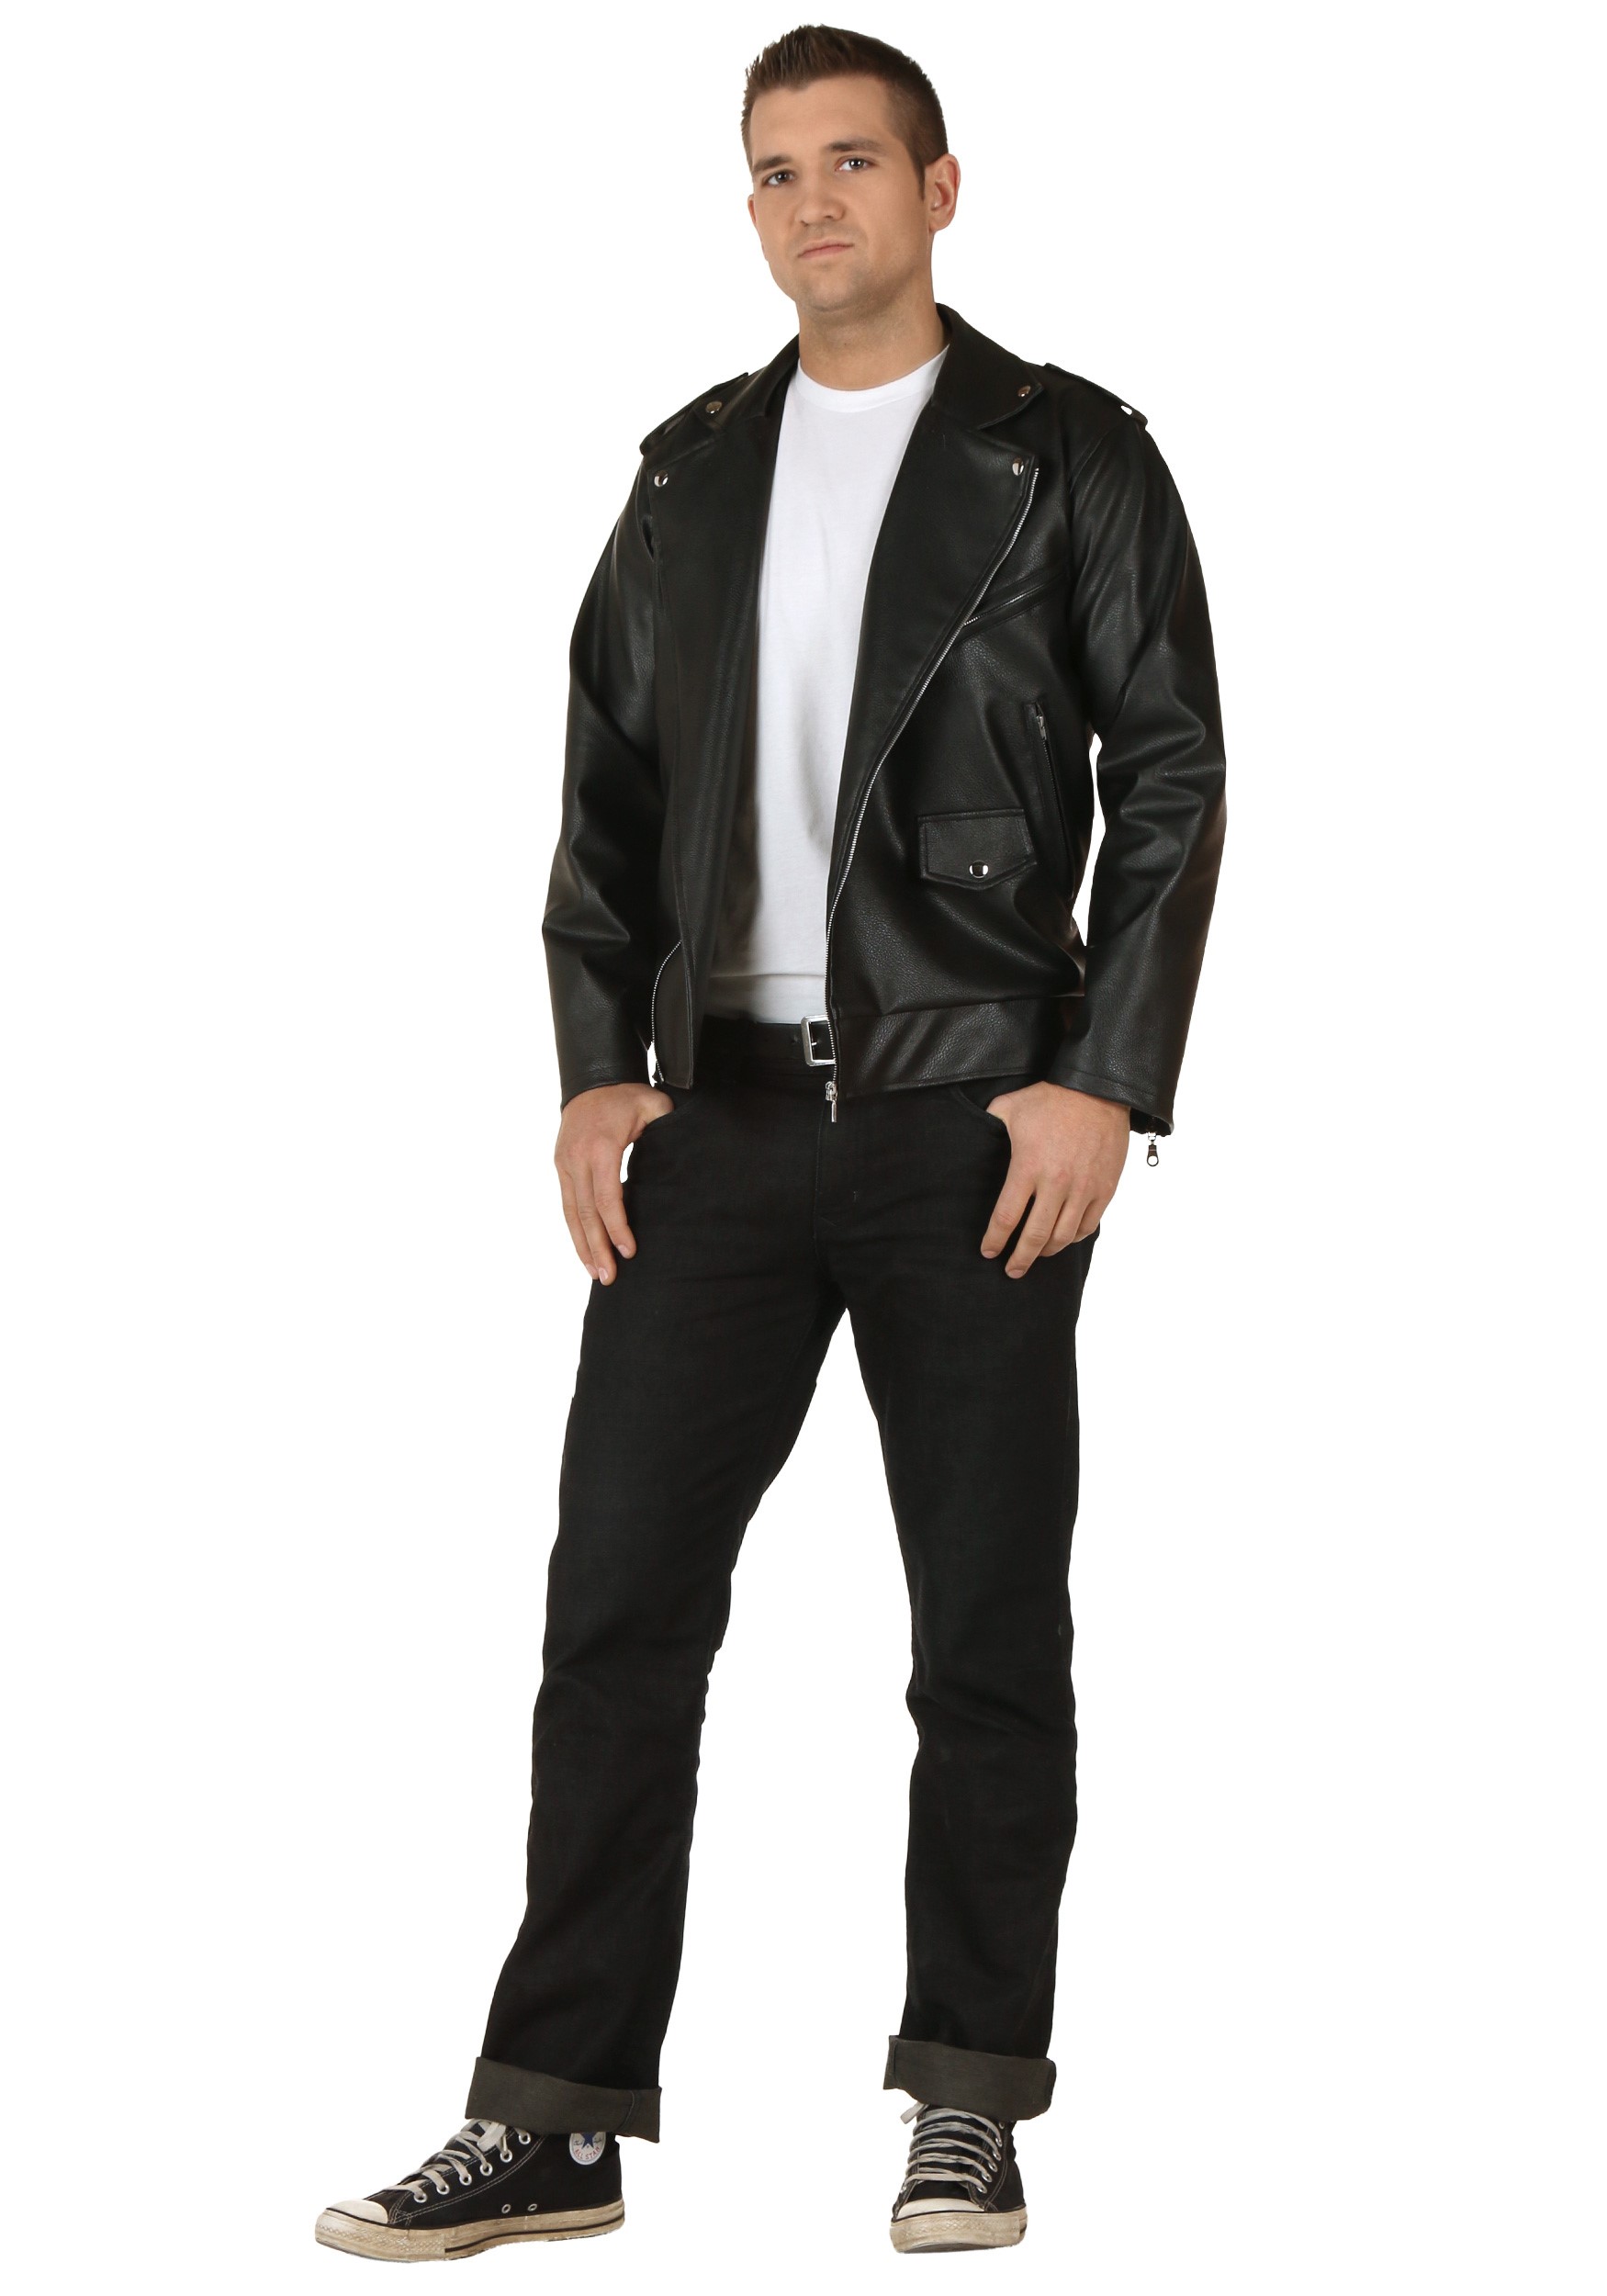 Image of FUN Costumes Plus Size Grease Authentic T-Birds Jacket Costume | Exclusive